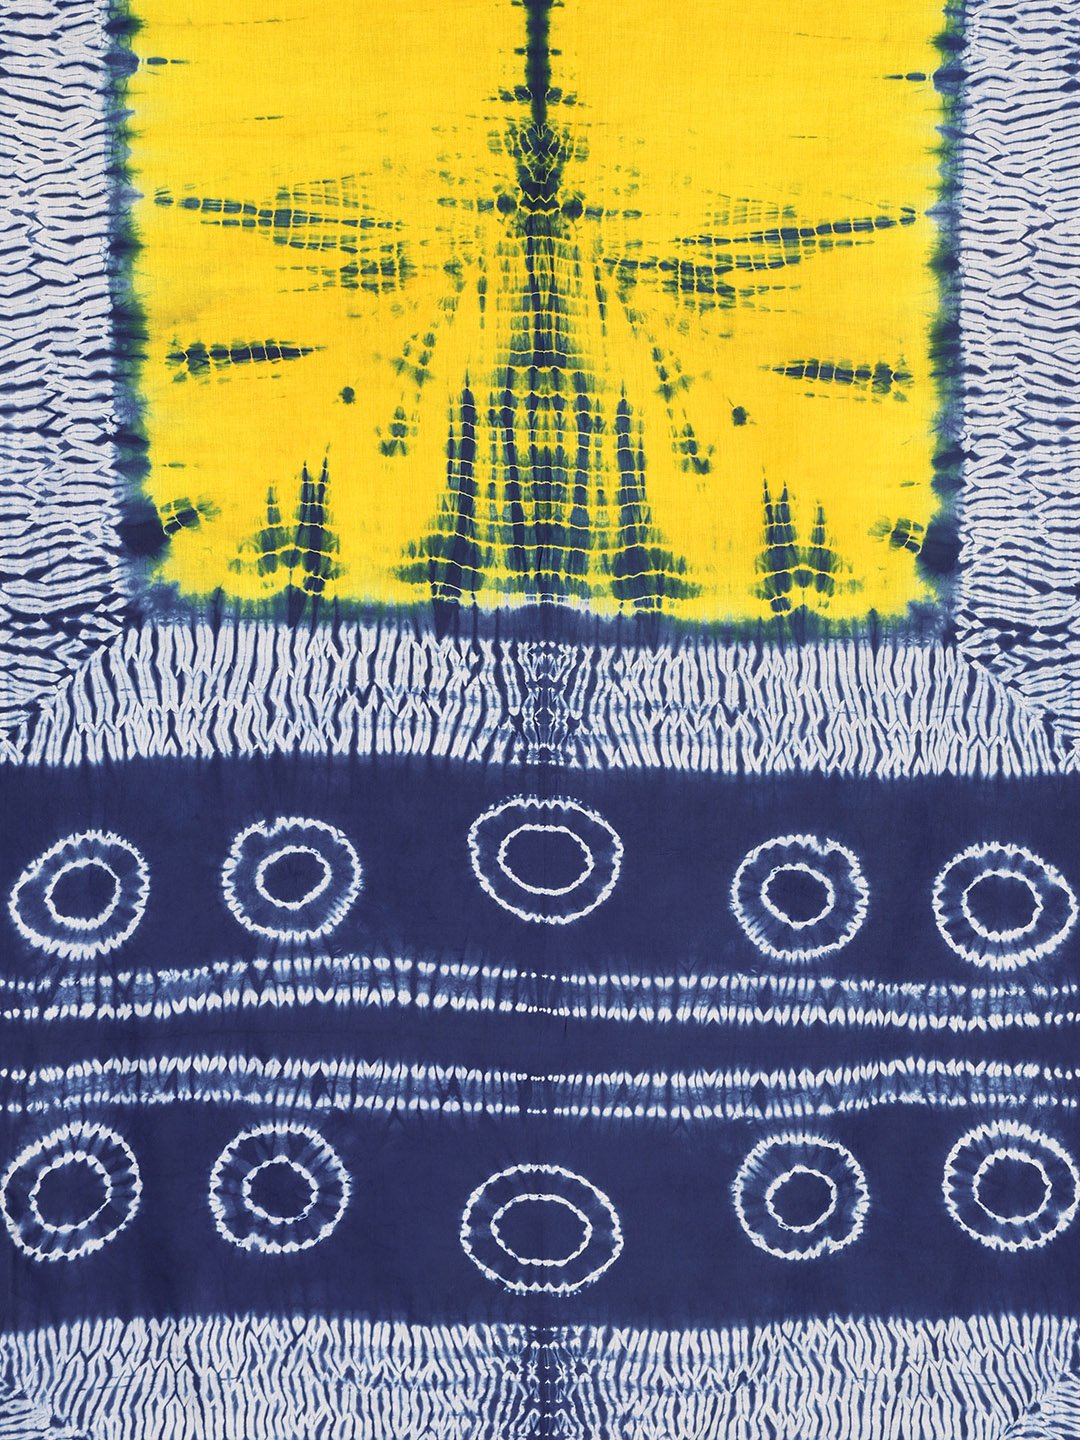 Yellow & Navy Blue Shibori Tie & Dyed Handcrafted Cotton Saree-Saree-Kalakari India-BHKPSA0034-Cotton, Geographical Indication, Hand Blocks, Hand Crafted, Heritage Prints, Sarees, Shibori, Sustainable Fabrics-[Linen,Ethnic,wear,Fashionista,Handloom,Handicraft,Indigo,blockprint,block,print,Cotton,Chanderi,Blue, latest,classy,party,bollywood,trendy,summer,style,traditional,formal,elegant,unique,style,hand,block,print, dabu,booti,gift,present,glamorous,affordable,collectible,Sari,Saree,printed, hol